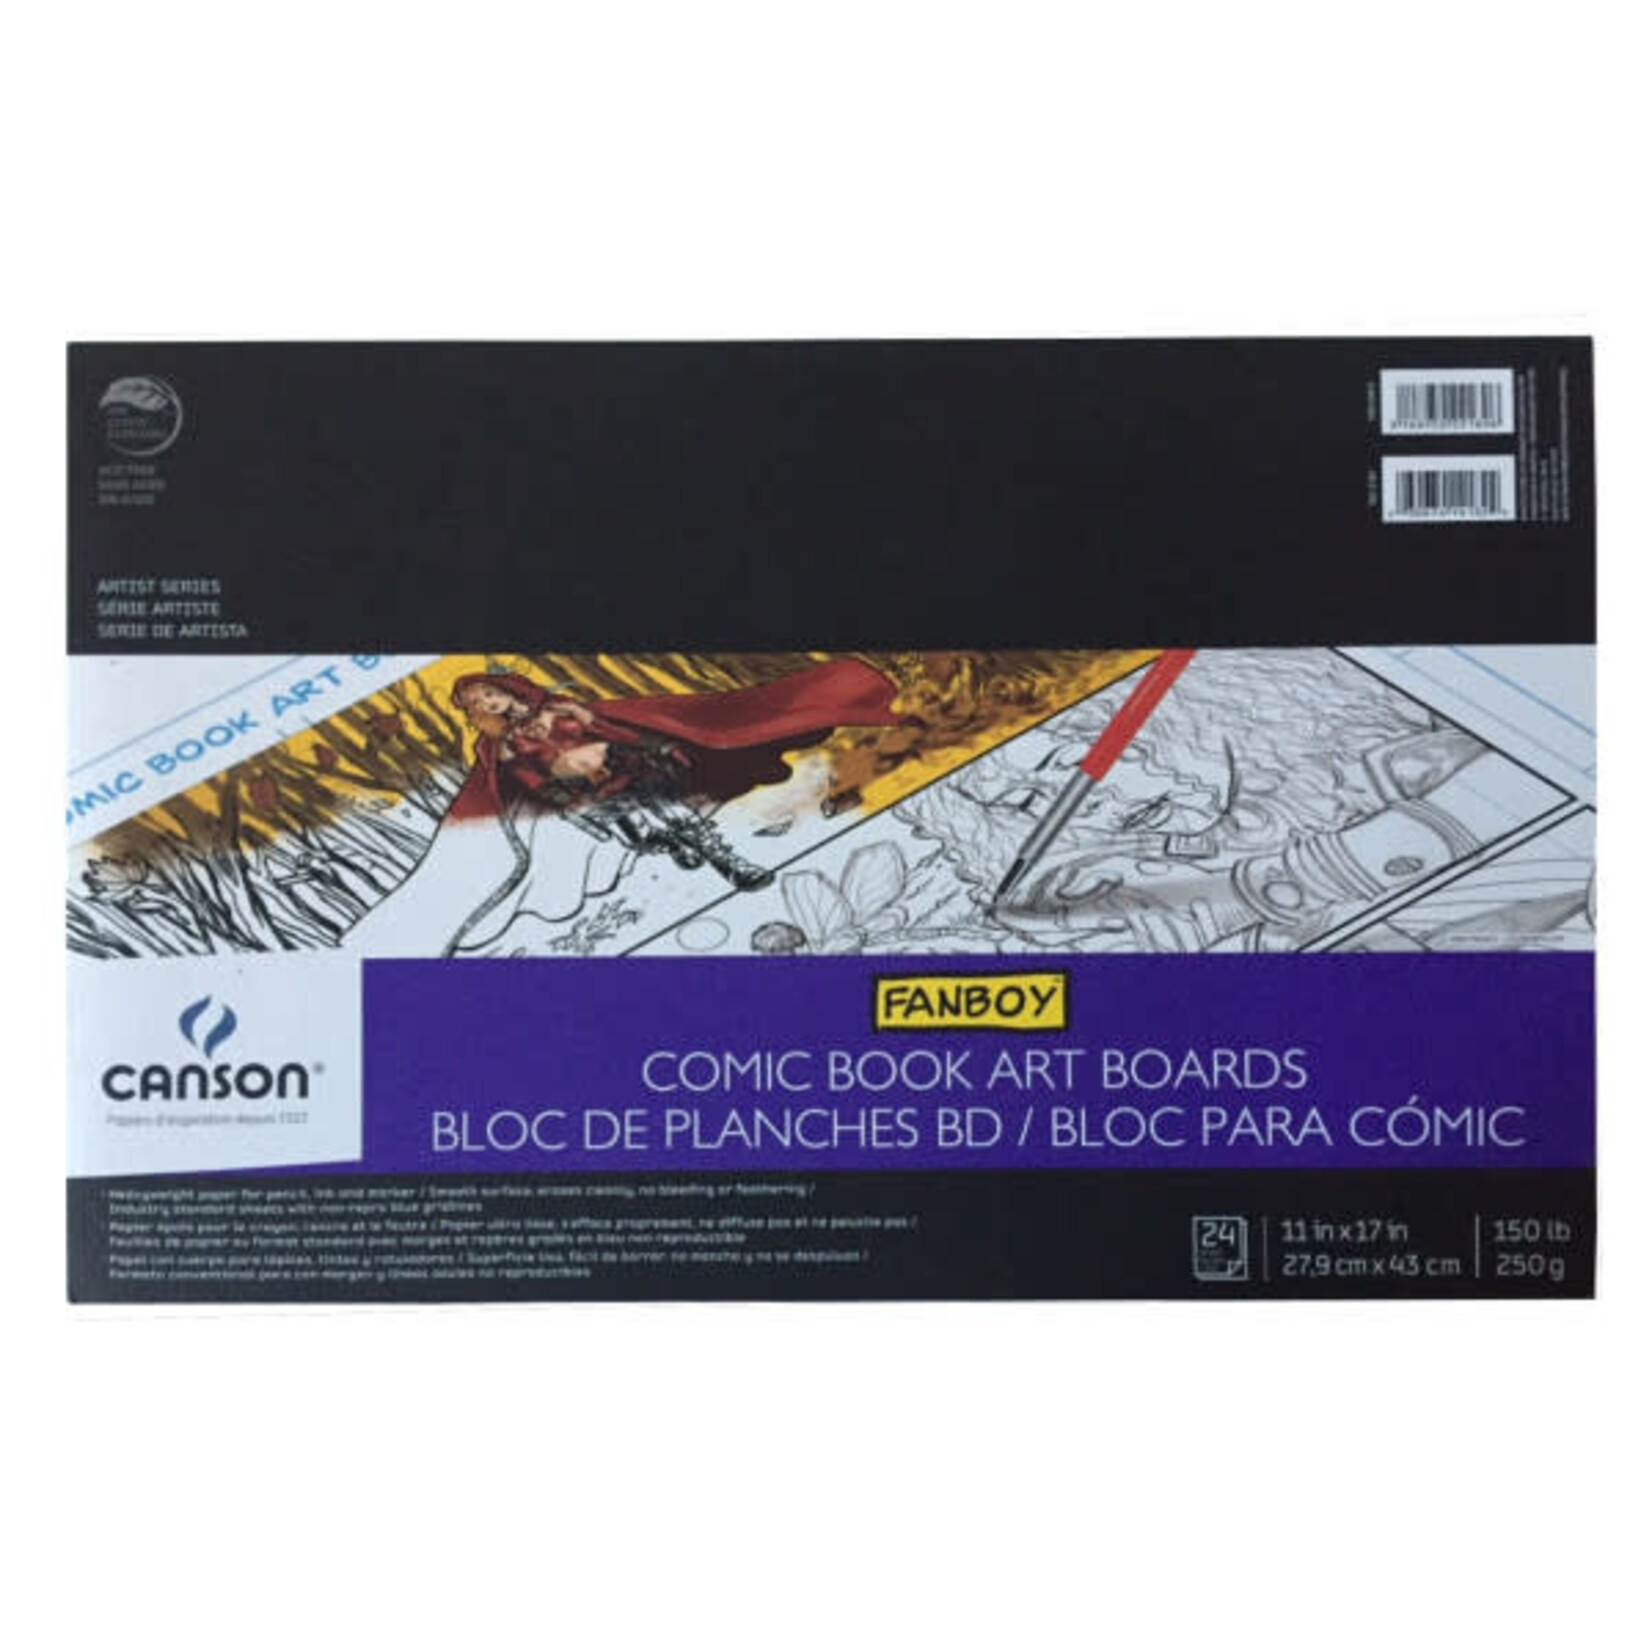 Canson Comic Book Art Boards, 11" x 17" - 24 Sheet Pack